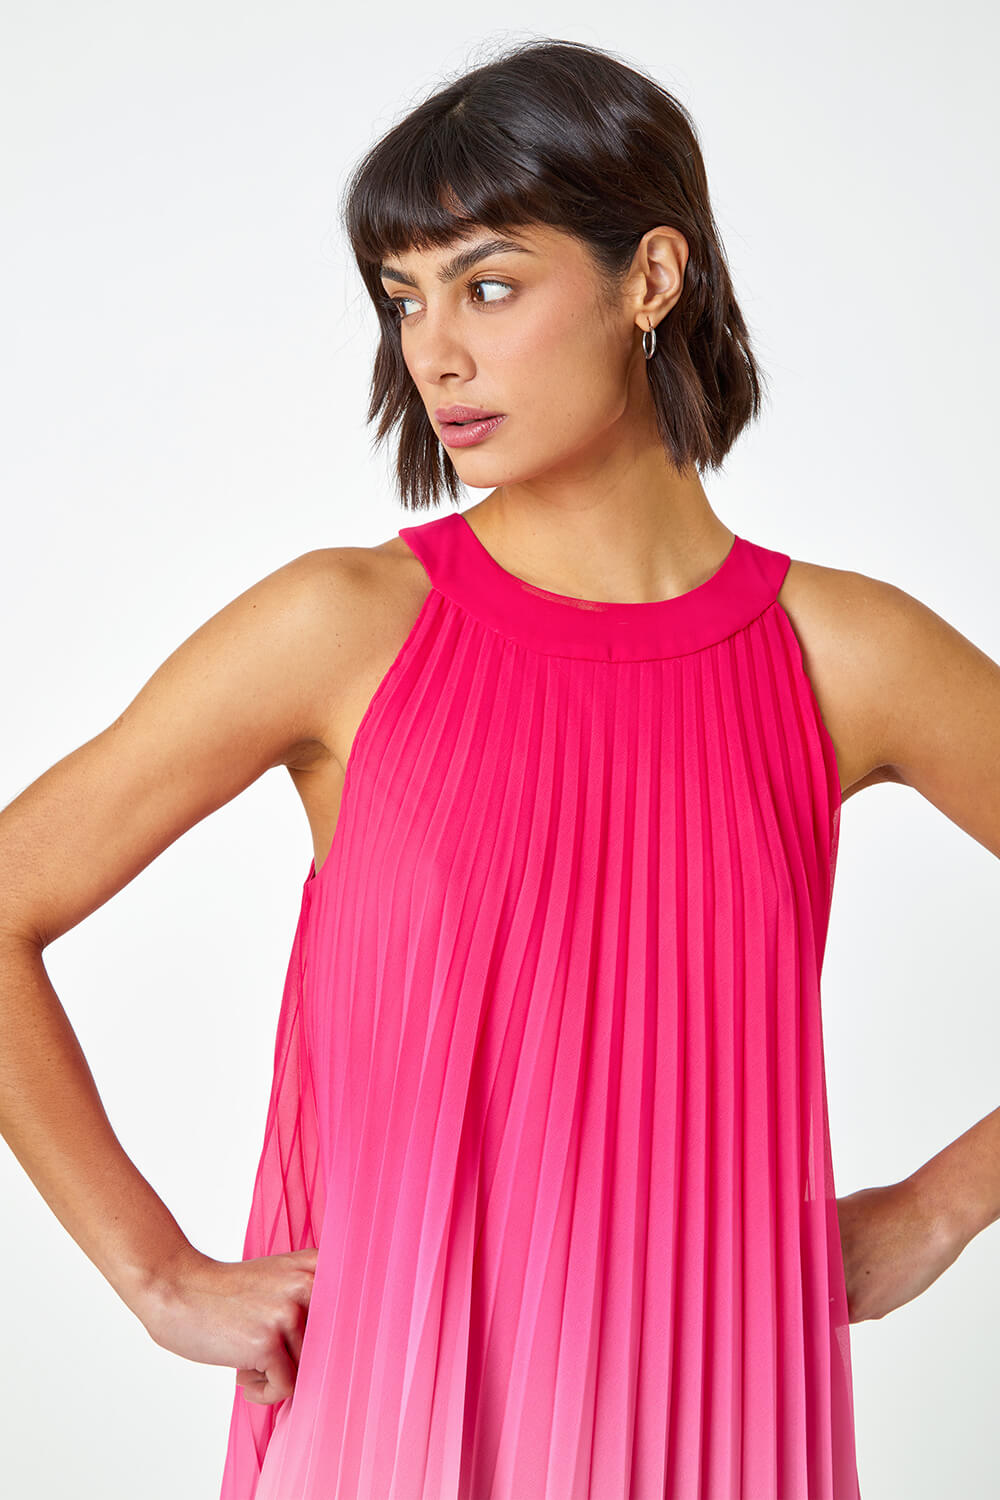 CERISE Ombre Halter Neck Pleated Swing Dress, Image 4 of 5